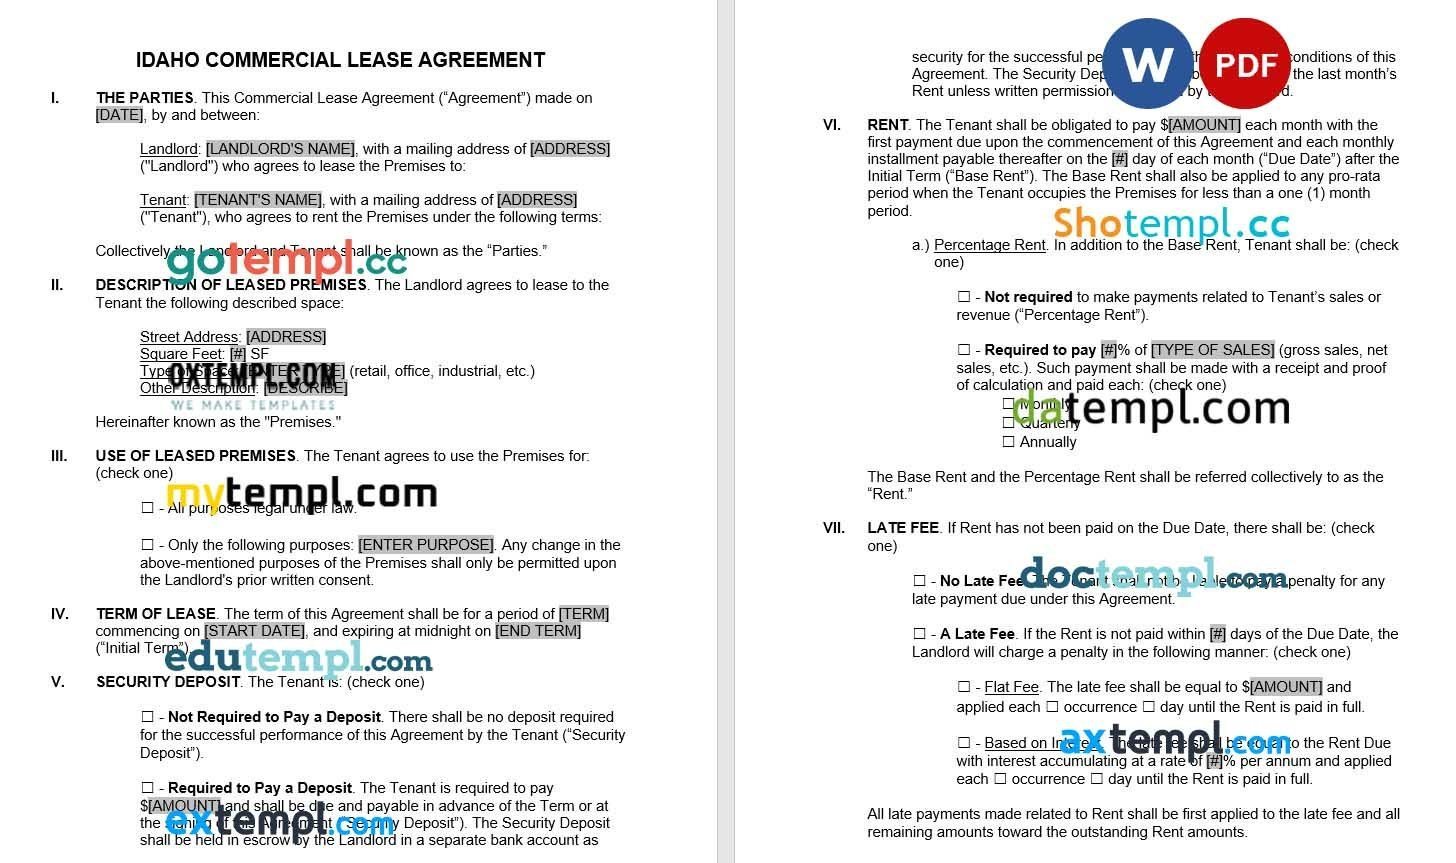 Idaho Commercial Lease Agreement Word example, fully editable